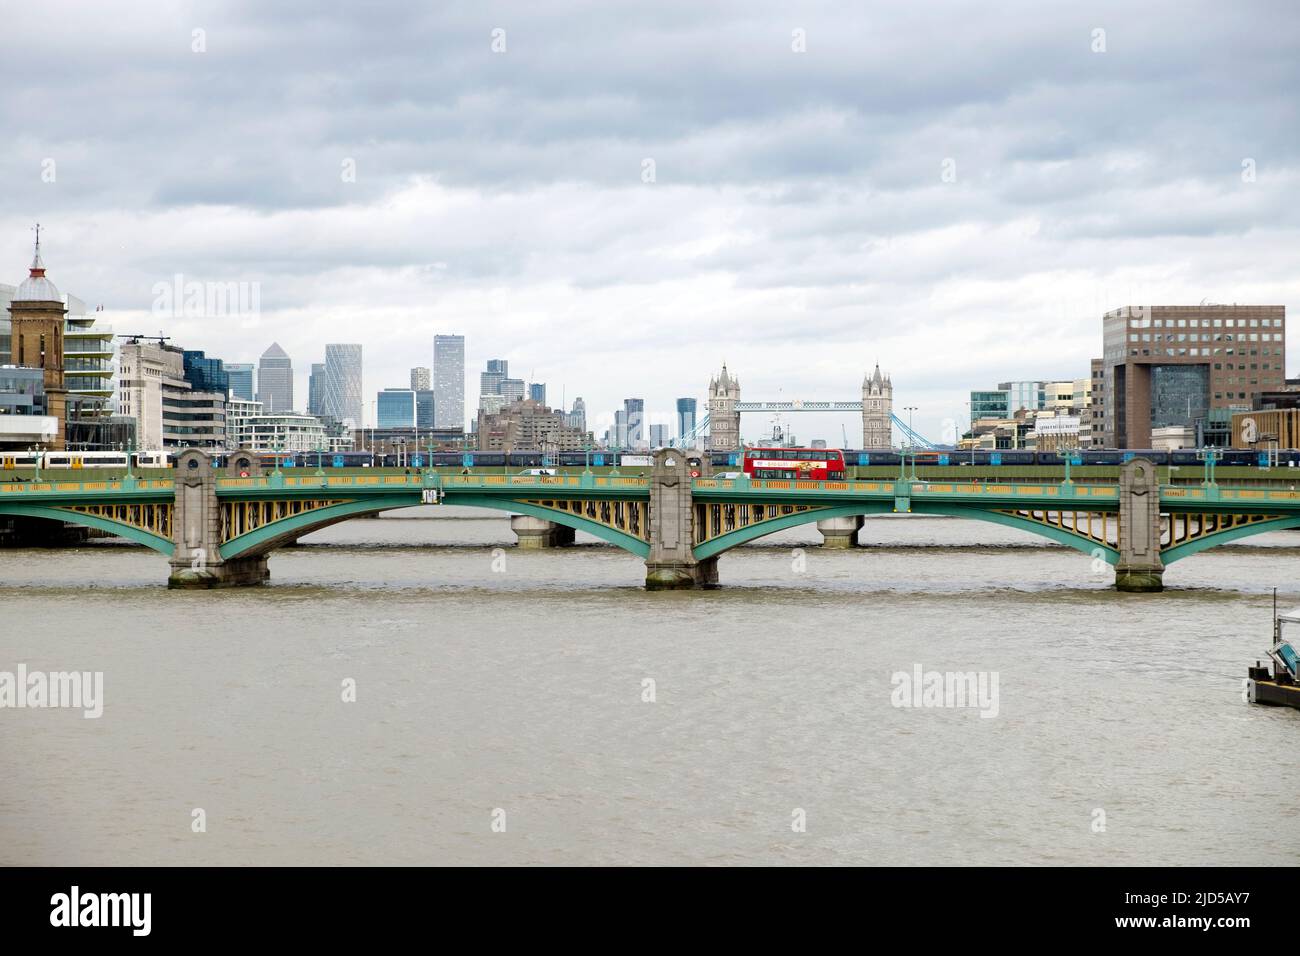 Red London double-decker bus crossing Southwark Bridge and view of River Thames looking towards Tower Bridge City of London UK in 2022 KATHY DEWITT Stock Photo